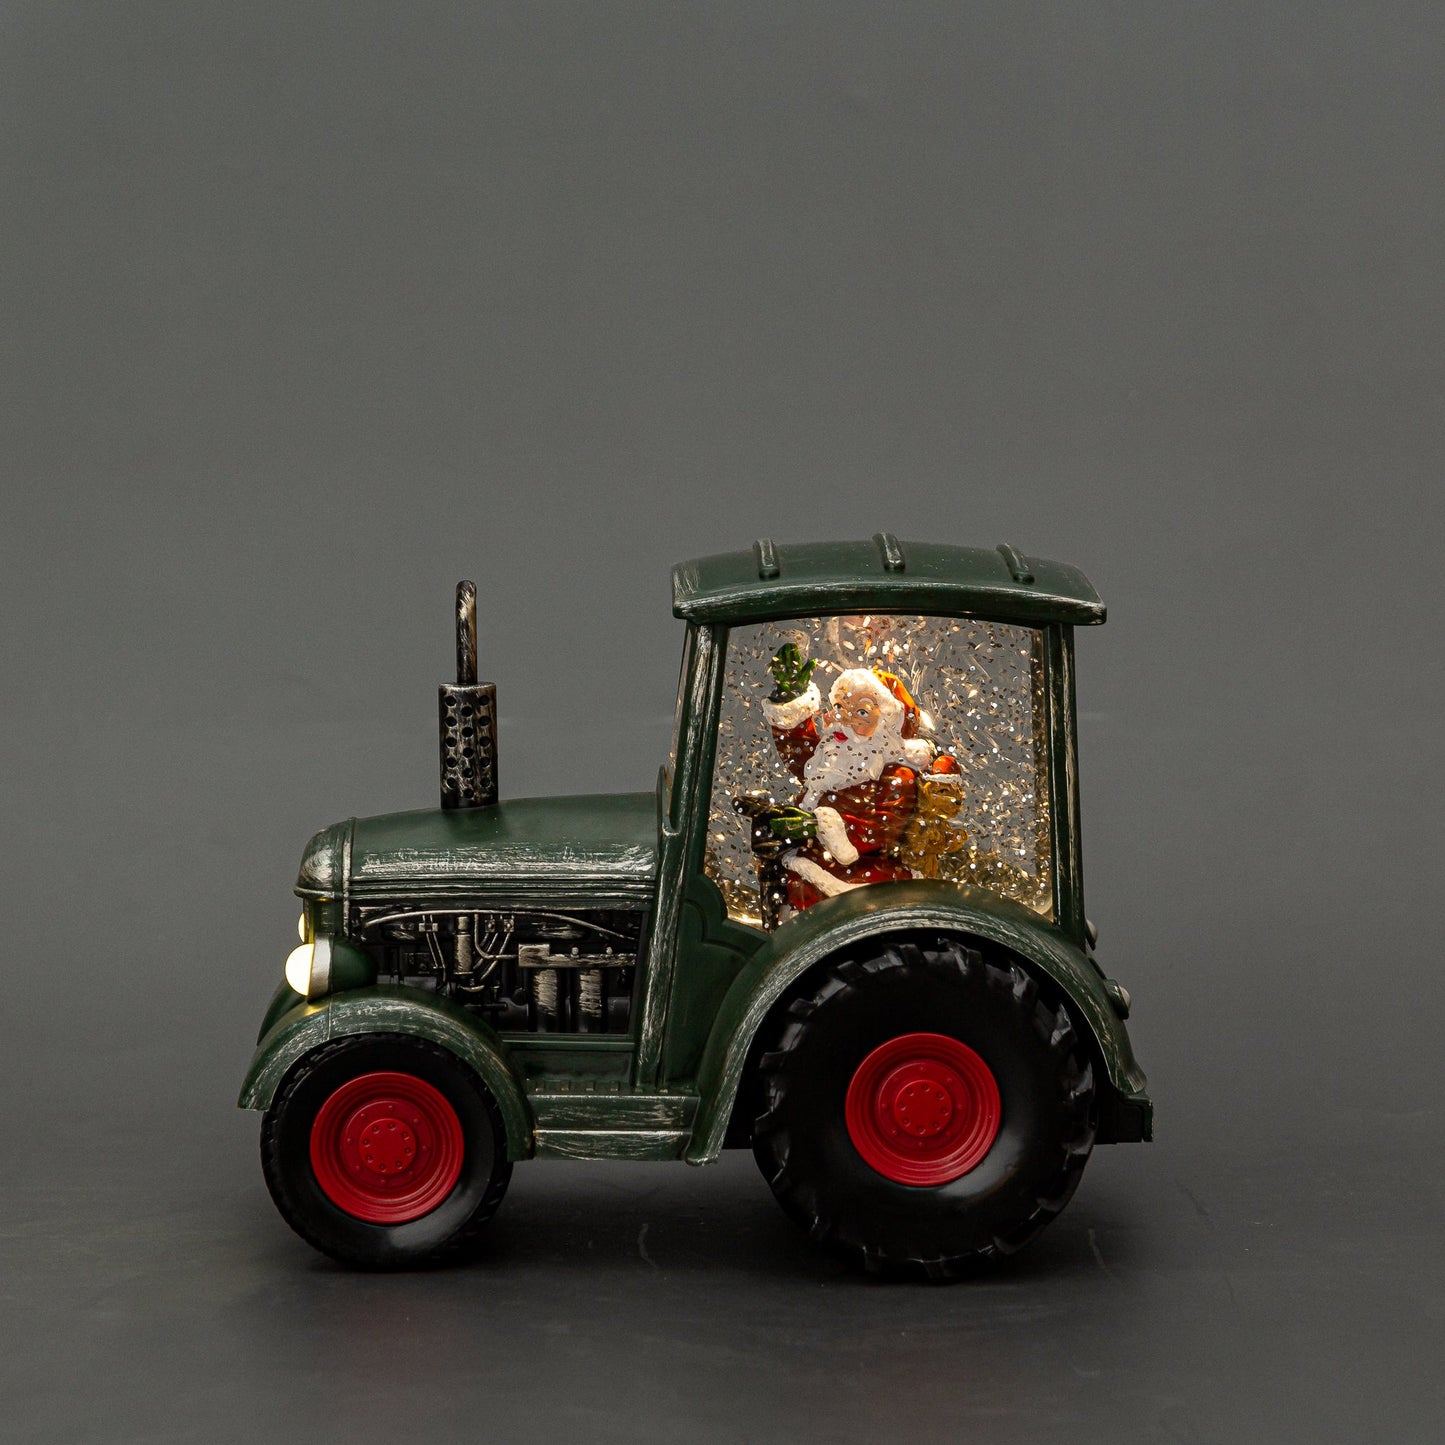 Tractor Green